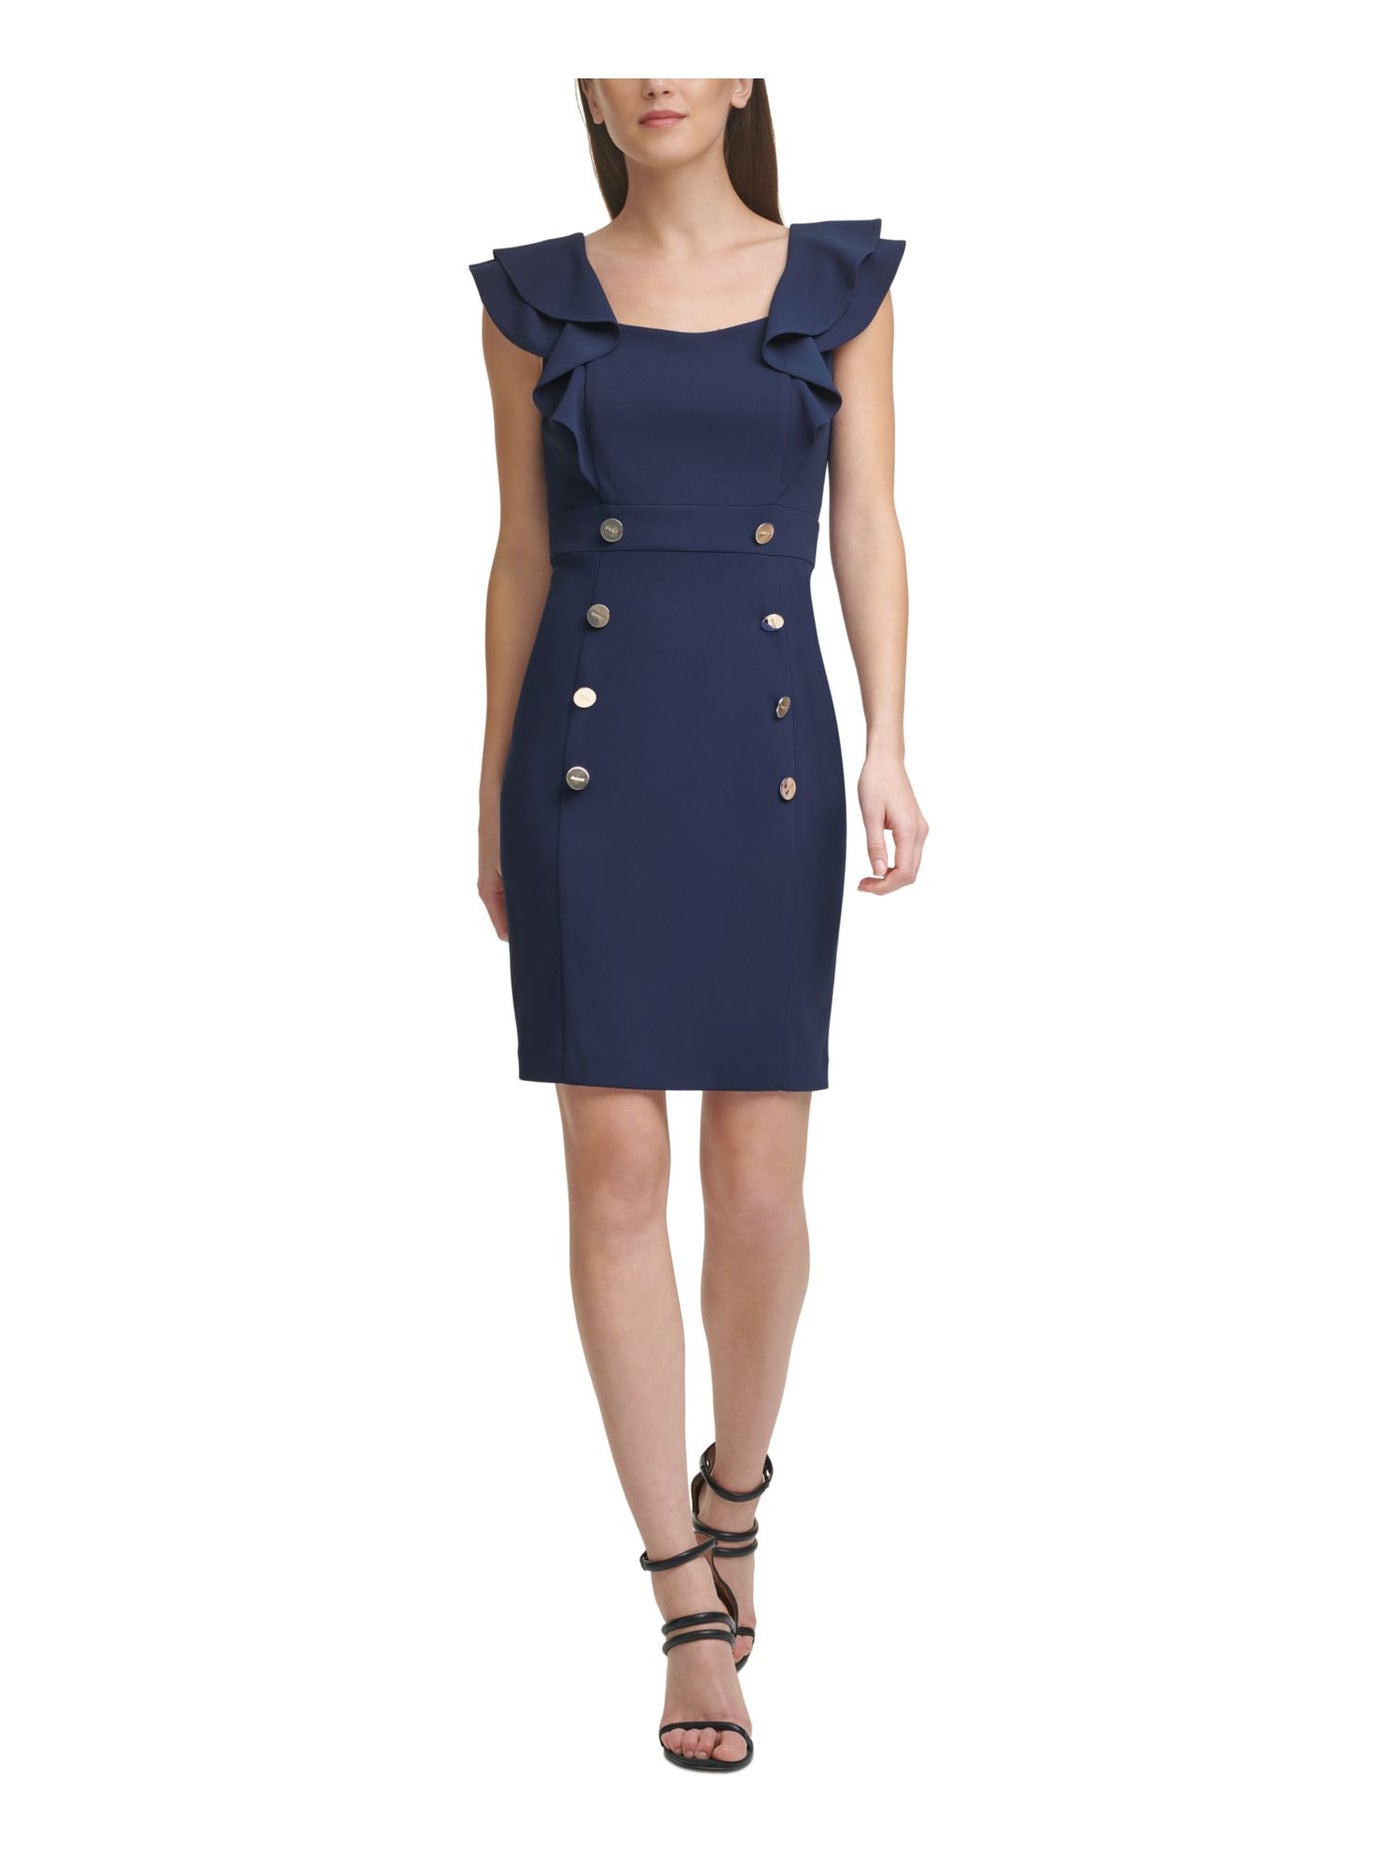 DKNY Womens Navy Stretch Zippered Ruffled Double Row Decorative Buttons Sleeveless Square Neck Above The Knee Party Sheath Dress 14